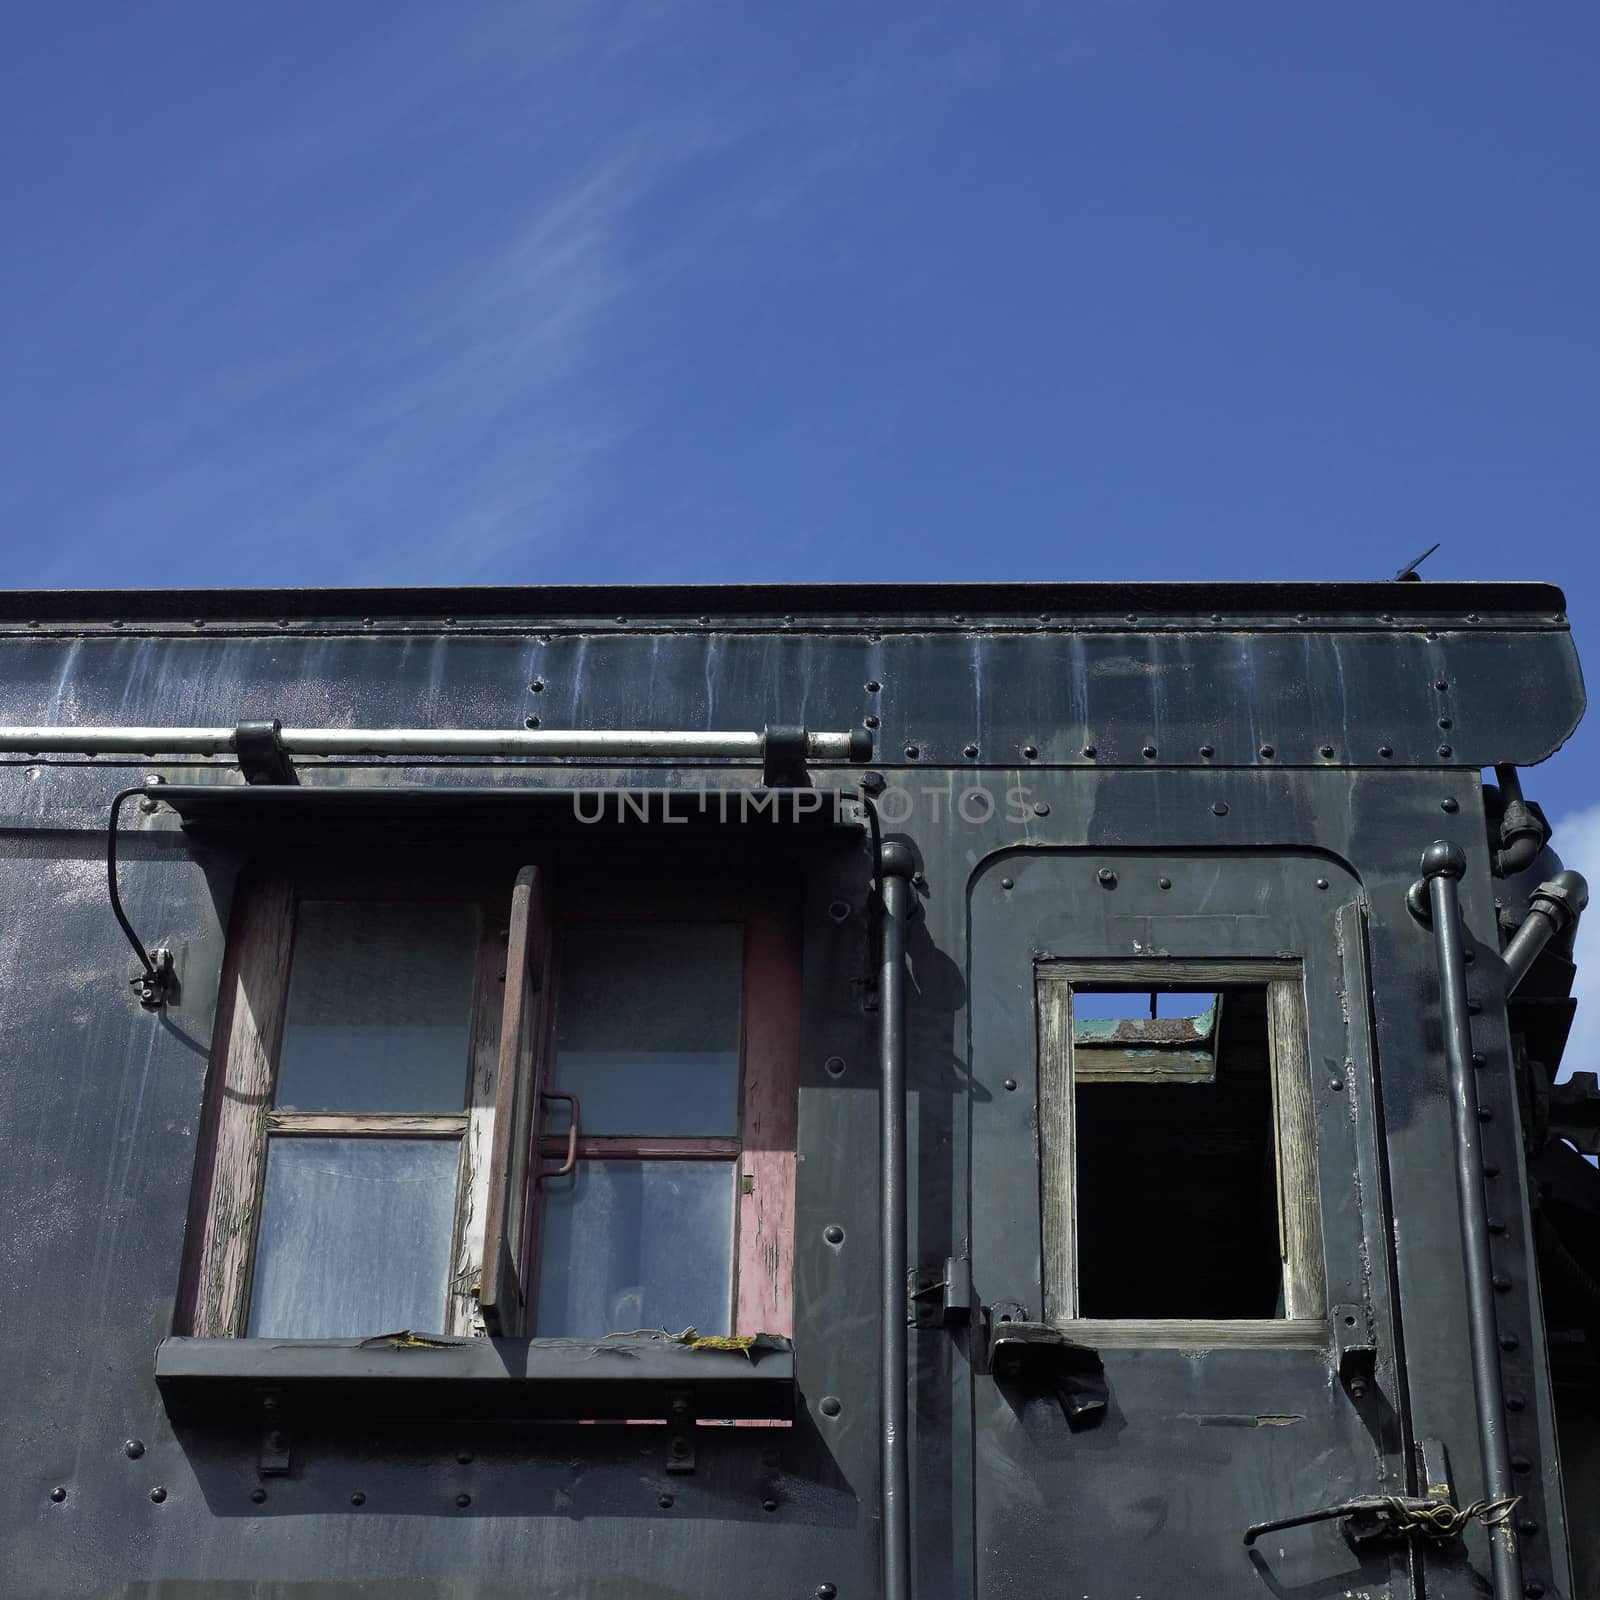 black side of an abandoned rail car featuring door and window